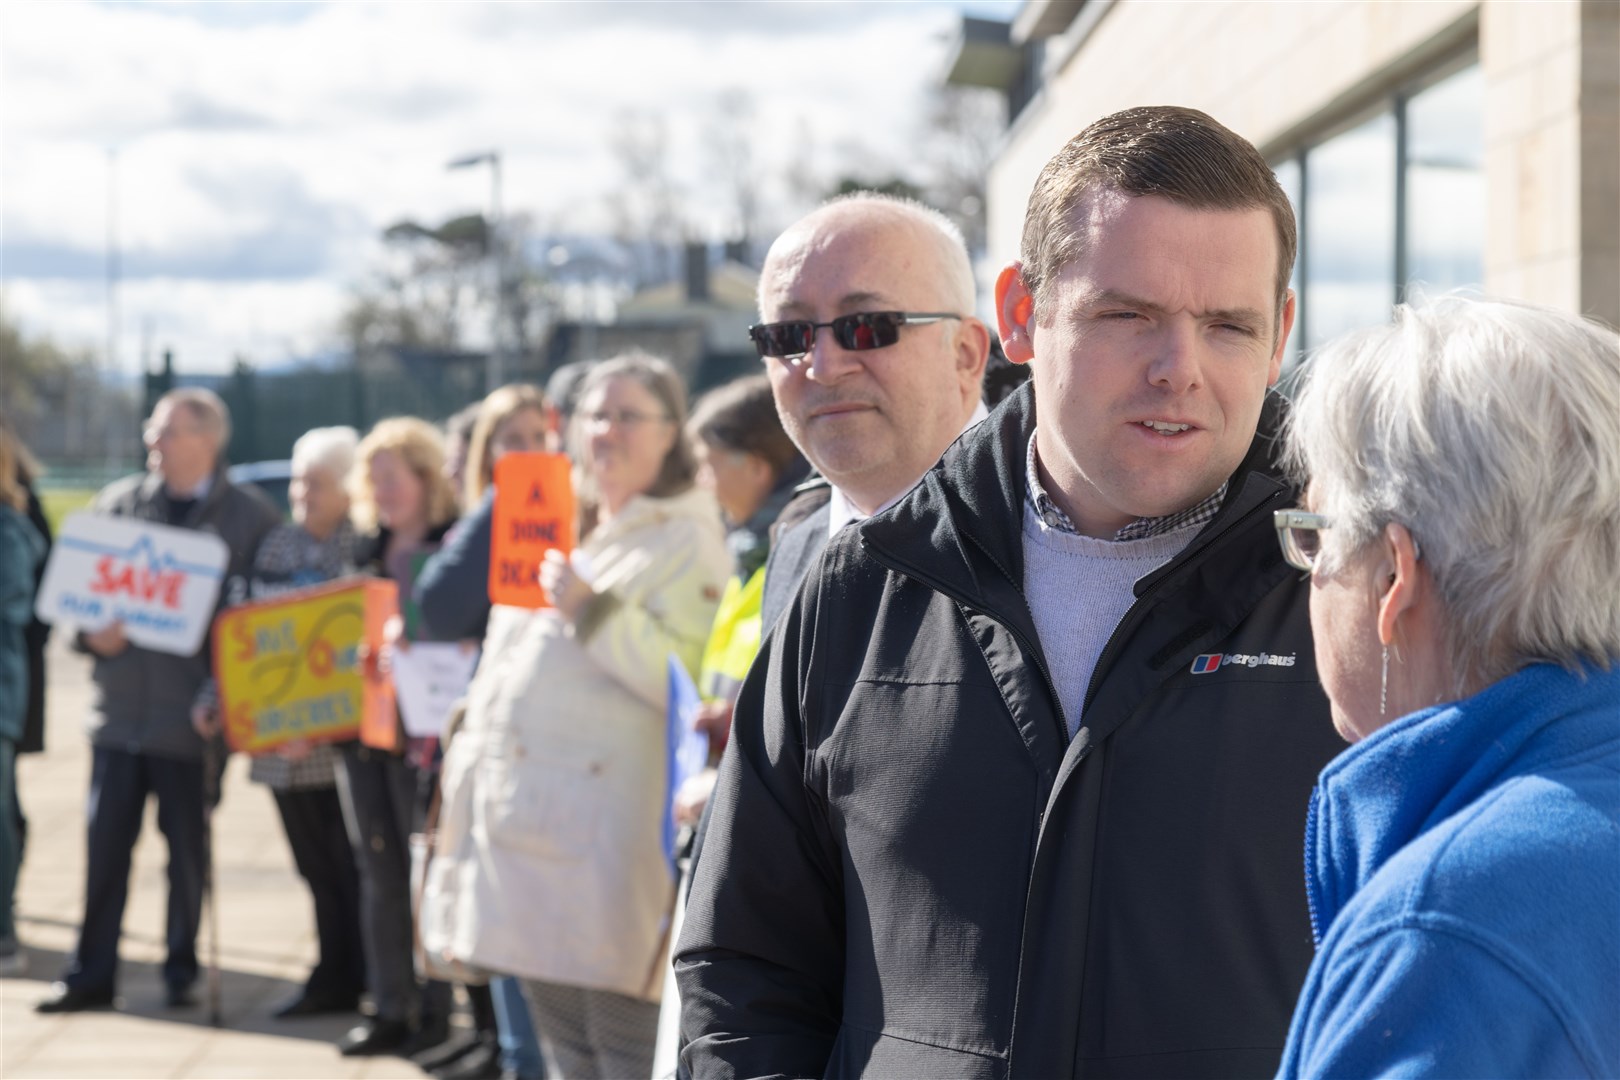 Moray MP Douglas Ross talking to the Save Our Surgeries campaigners. Picture: Beth Taylor